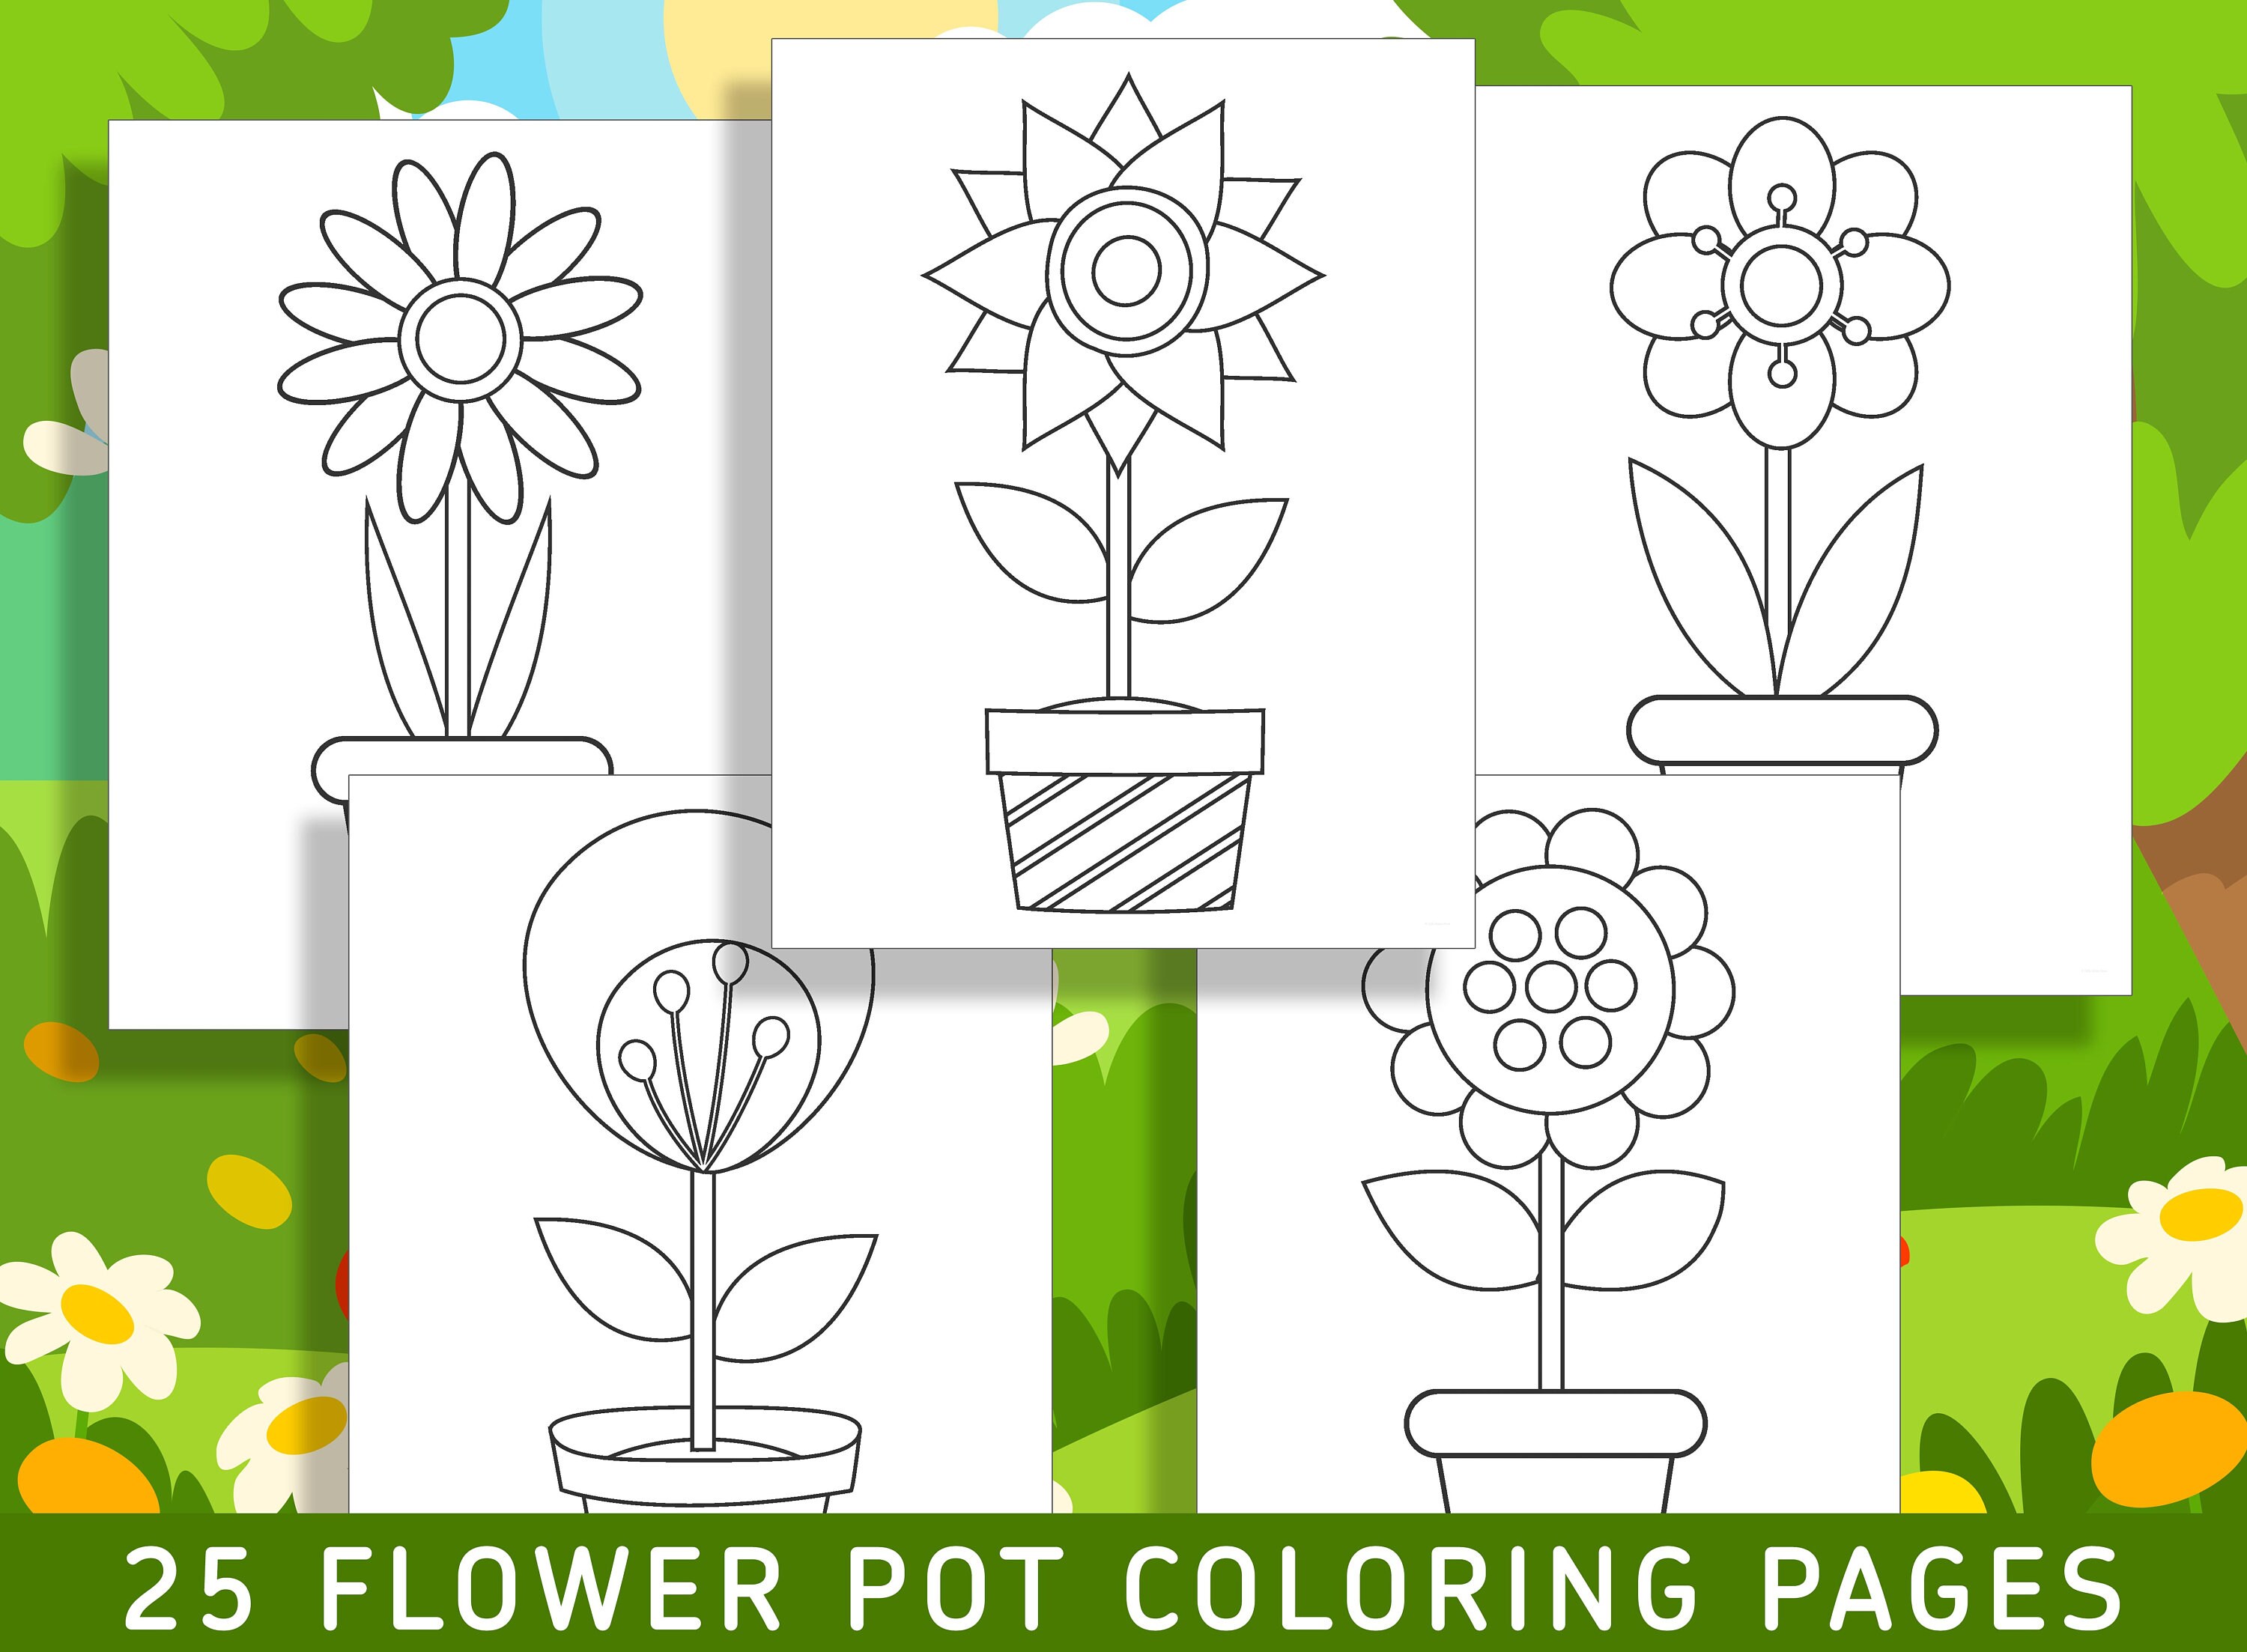 Fun and creative flower pot coloring pages for preschool